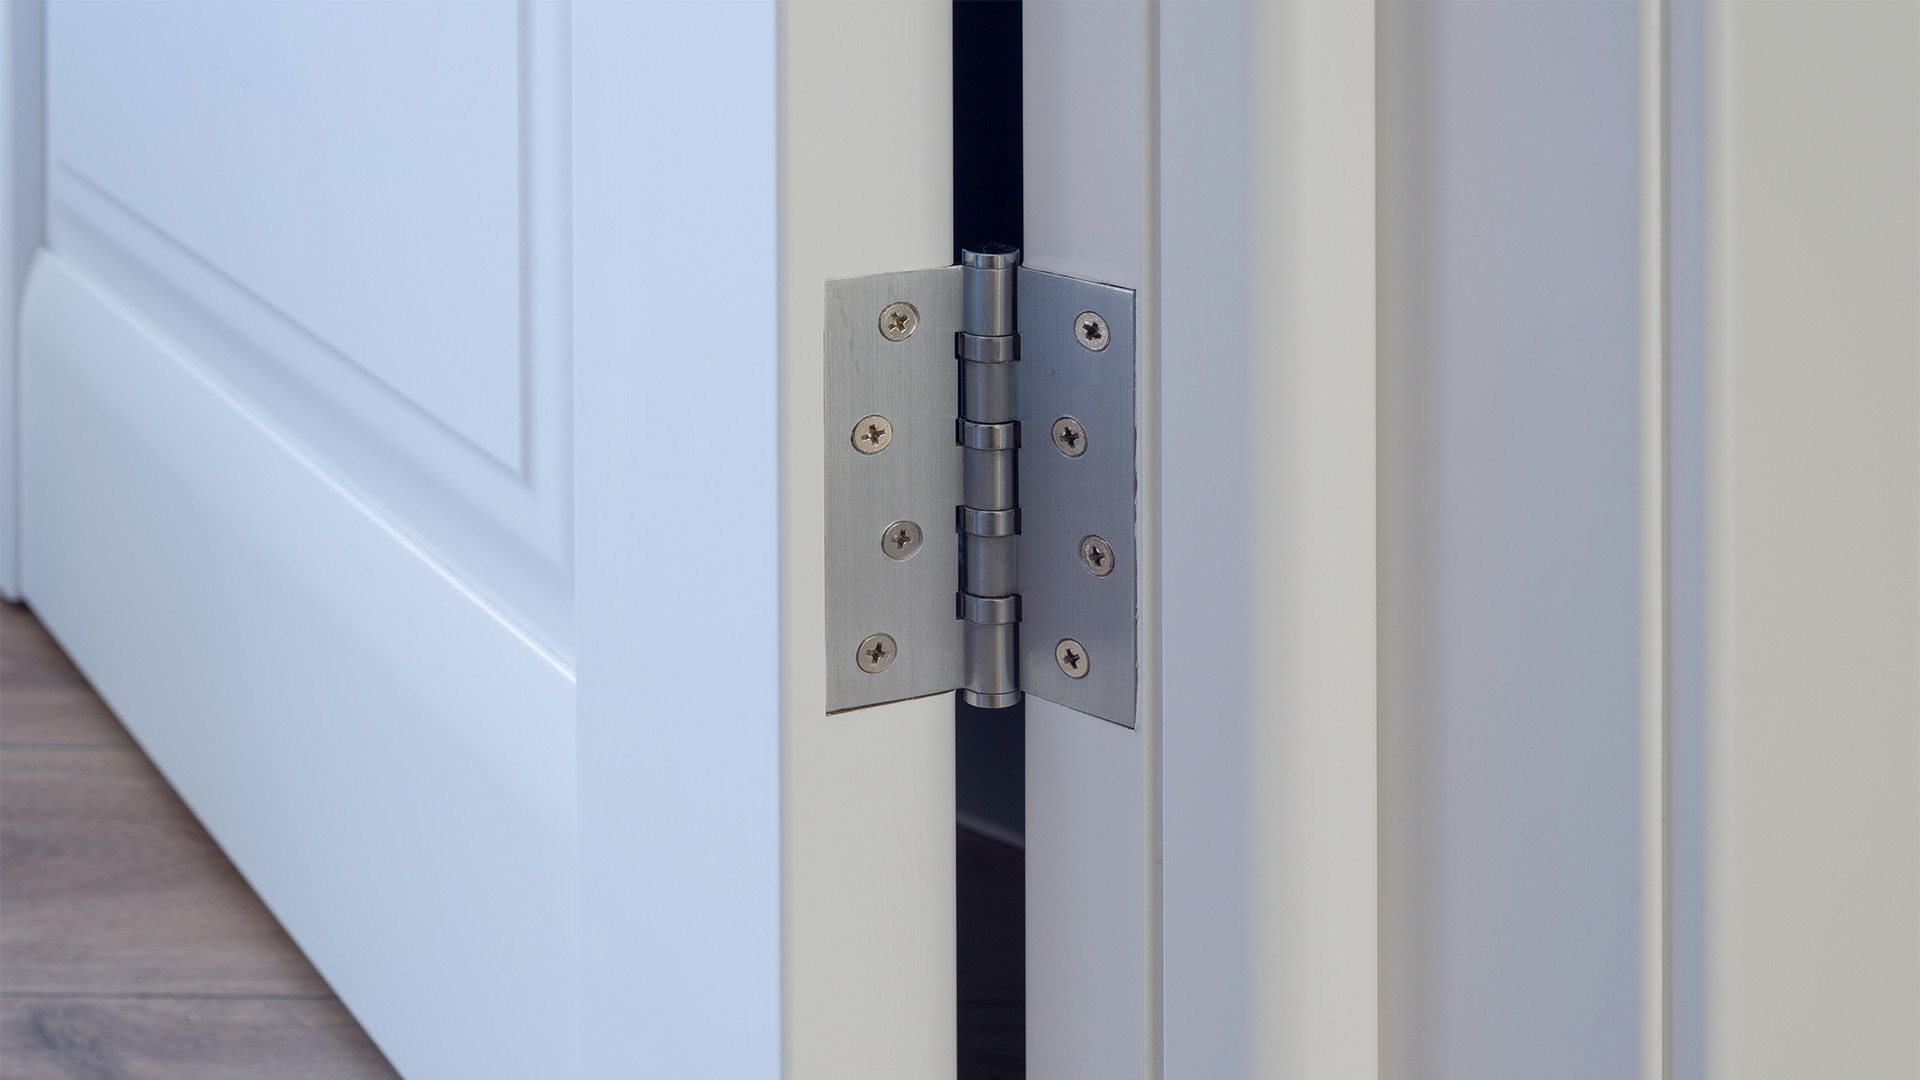 Door hinge buying guide: How to find replacement hinges.